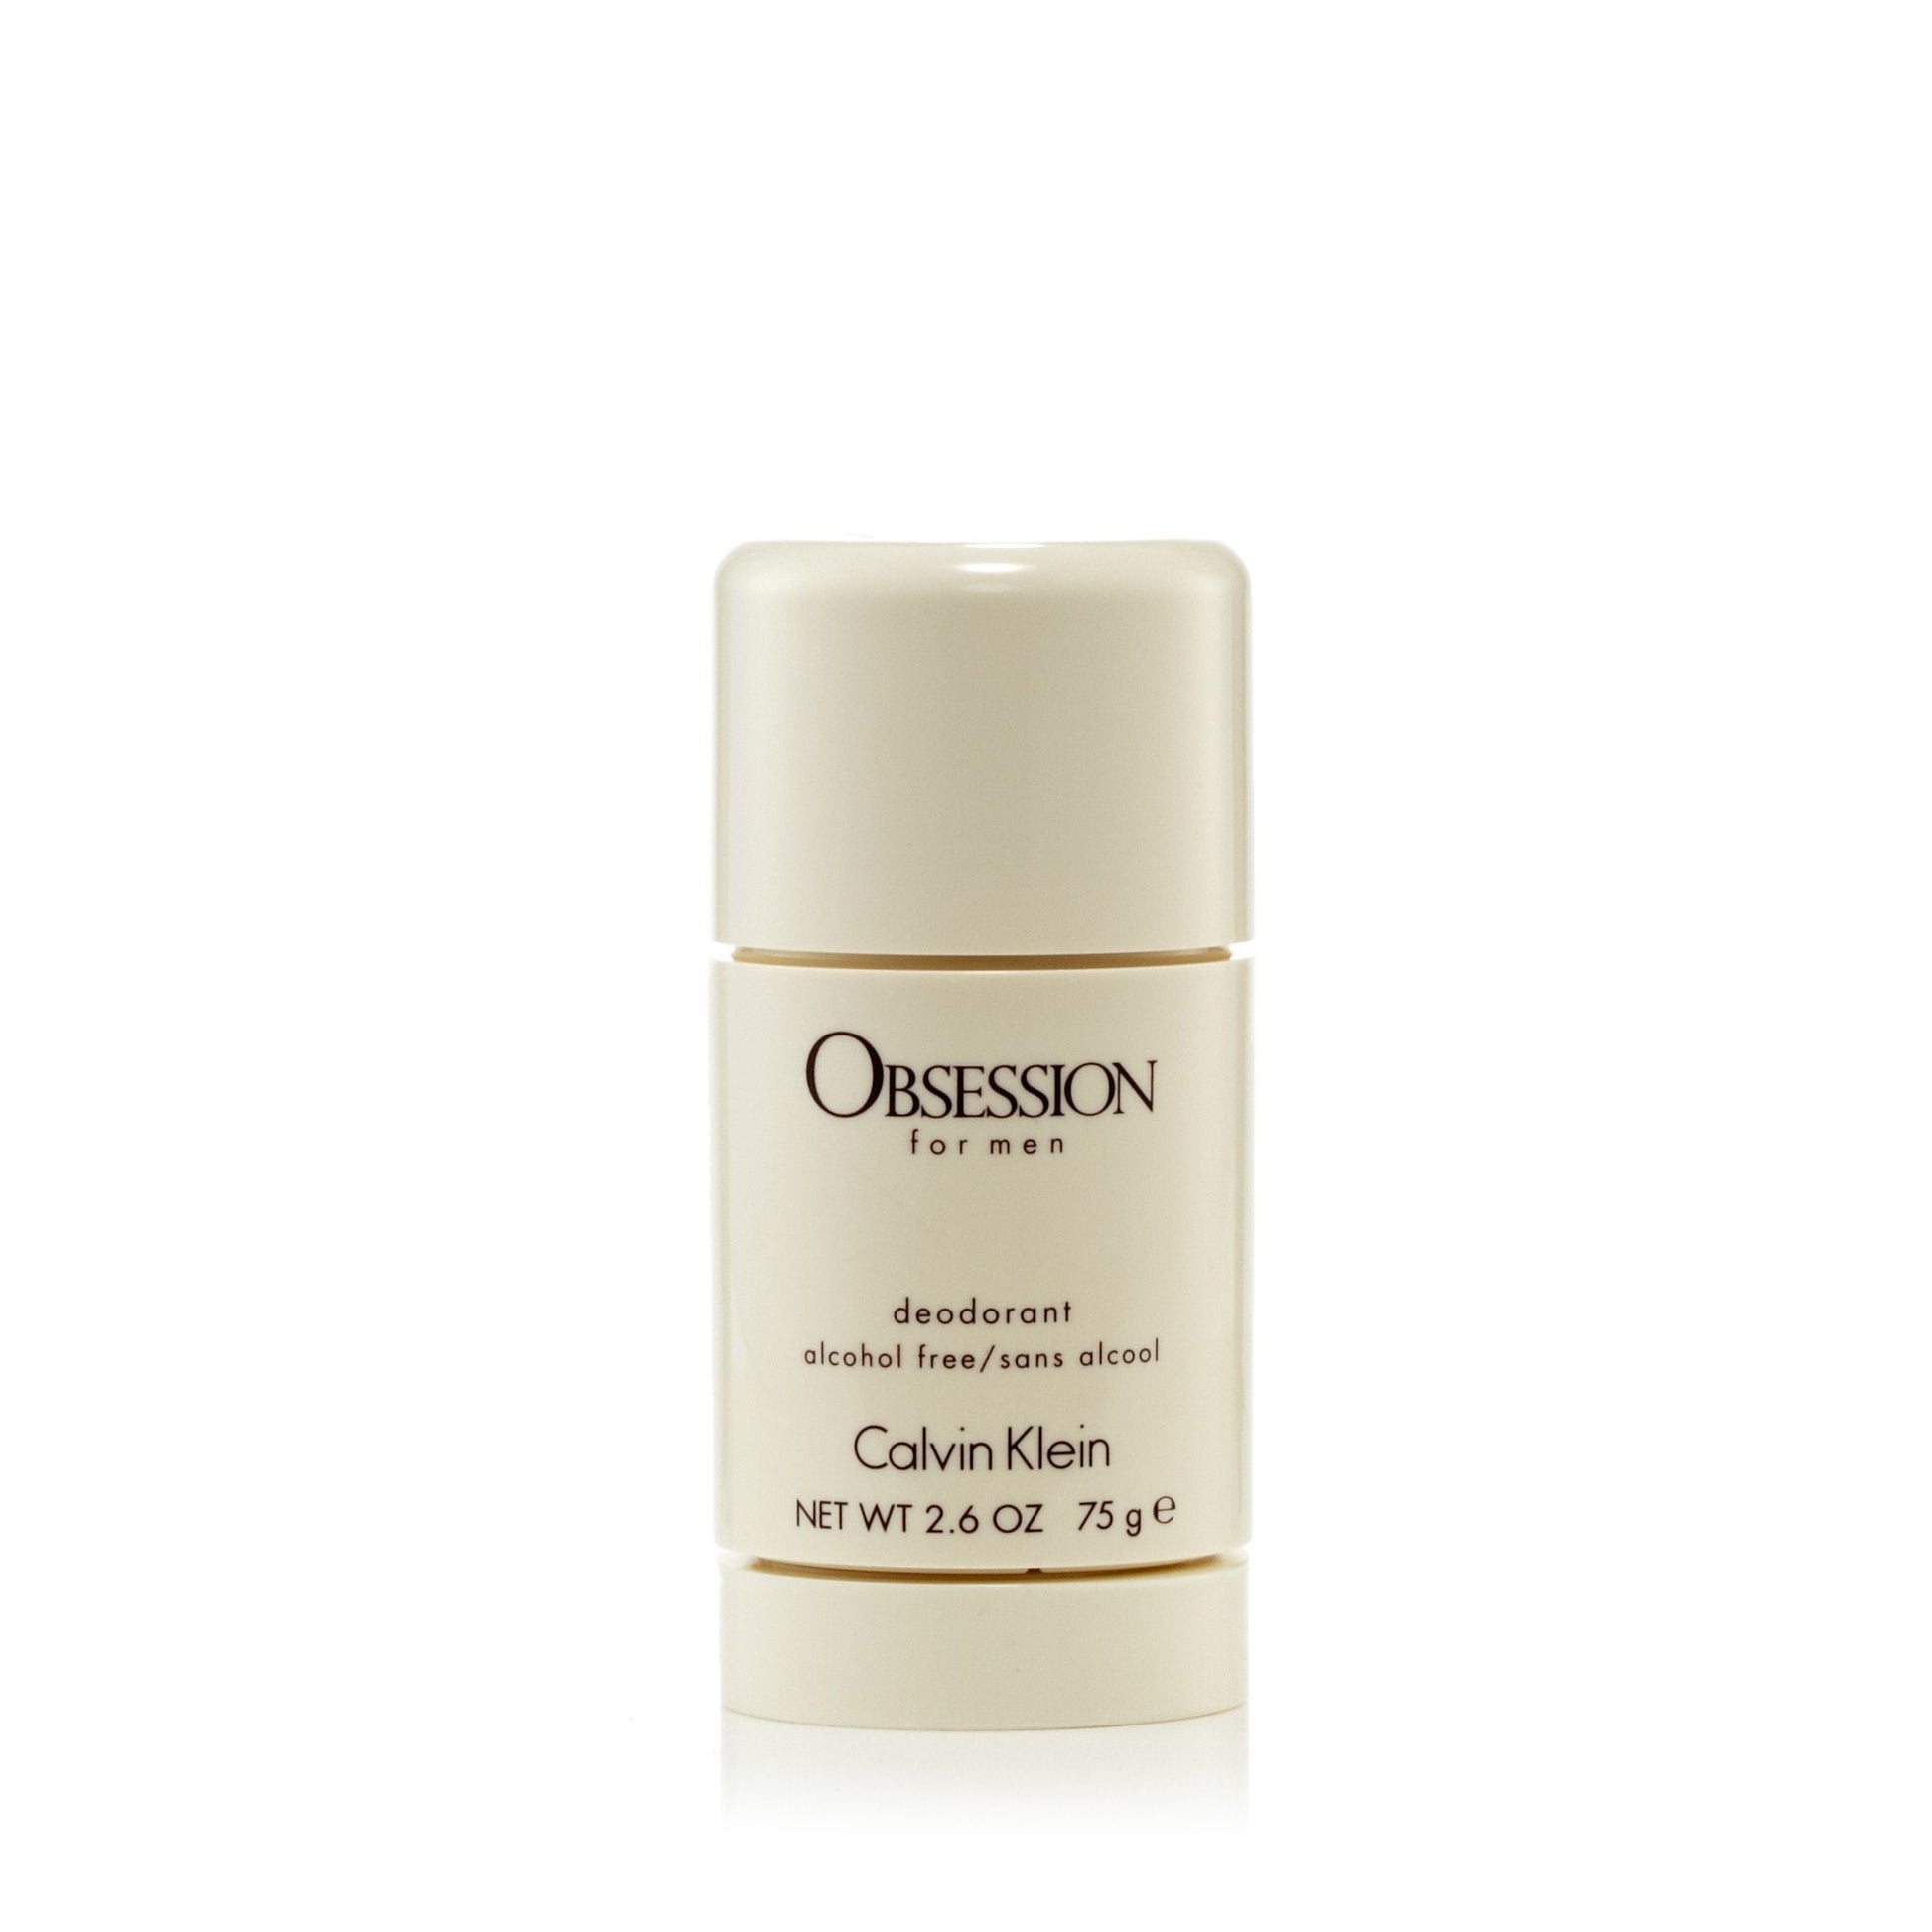 Obsession Deodorant for Men by Calvin Klein, Product image 1